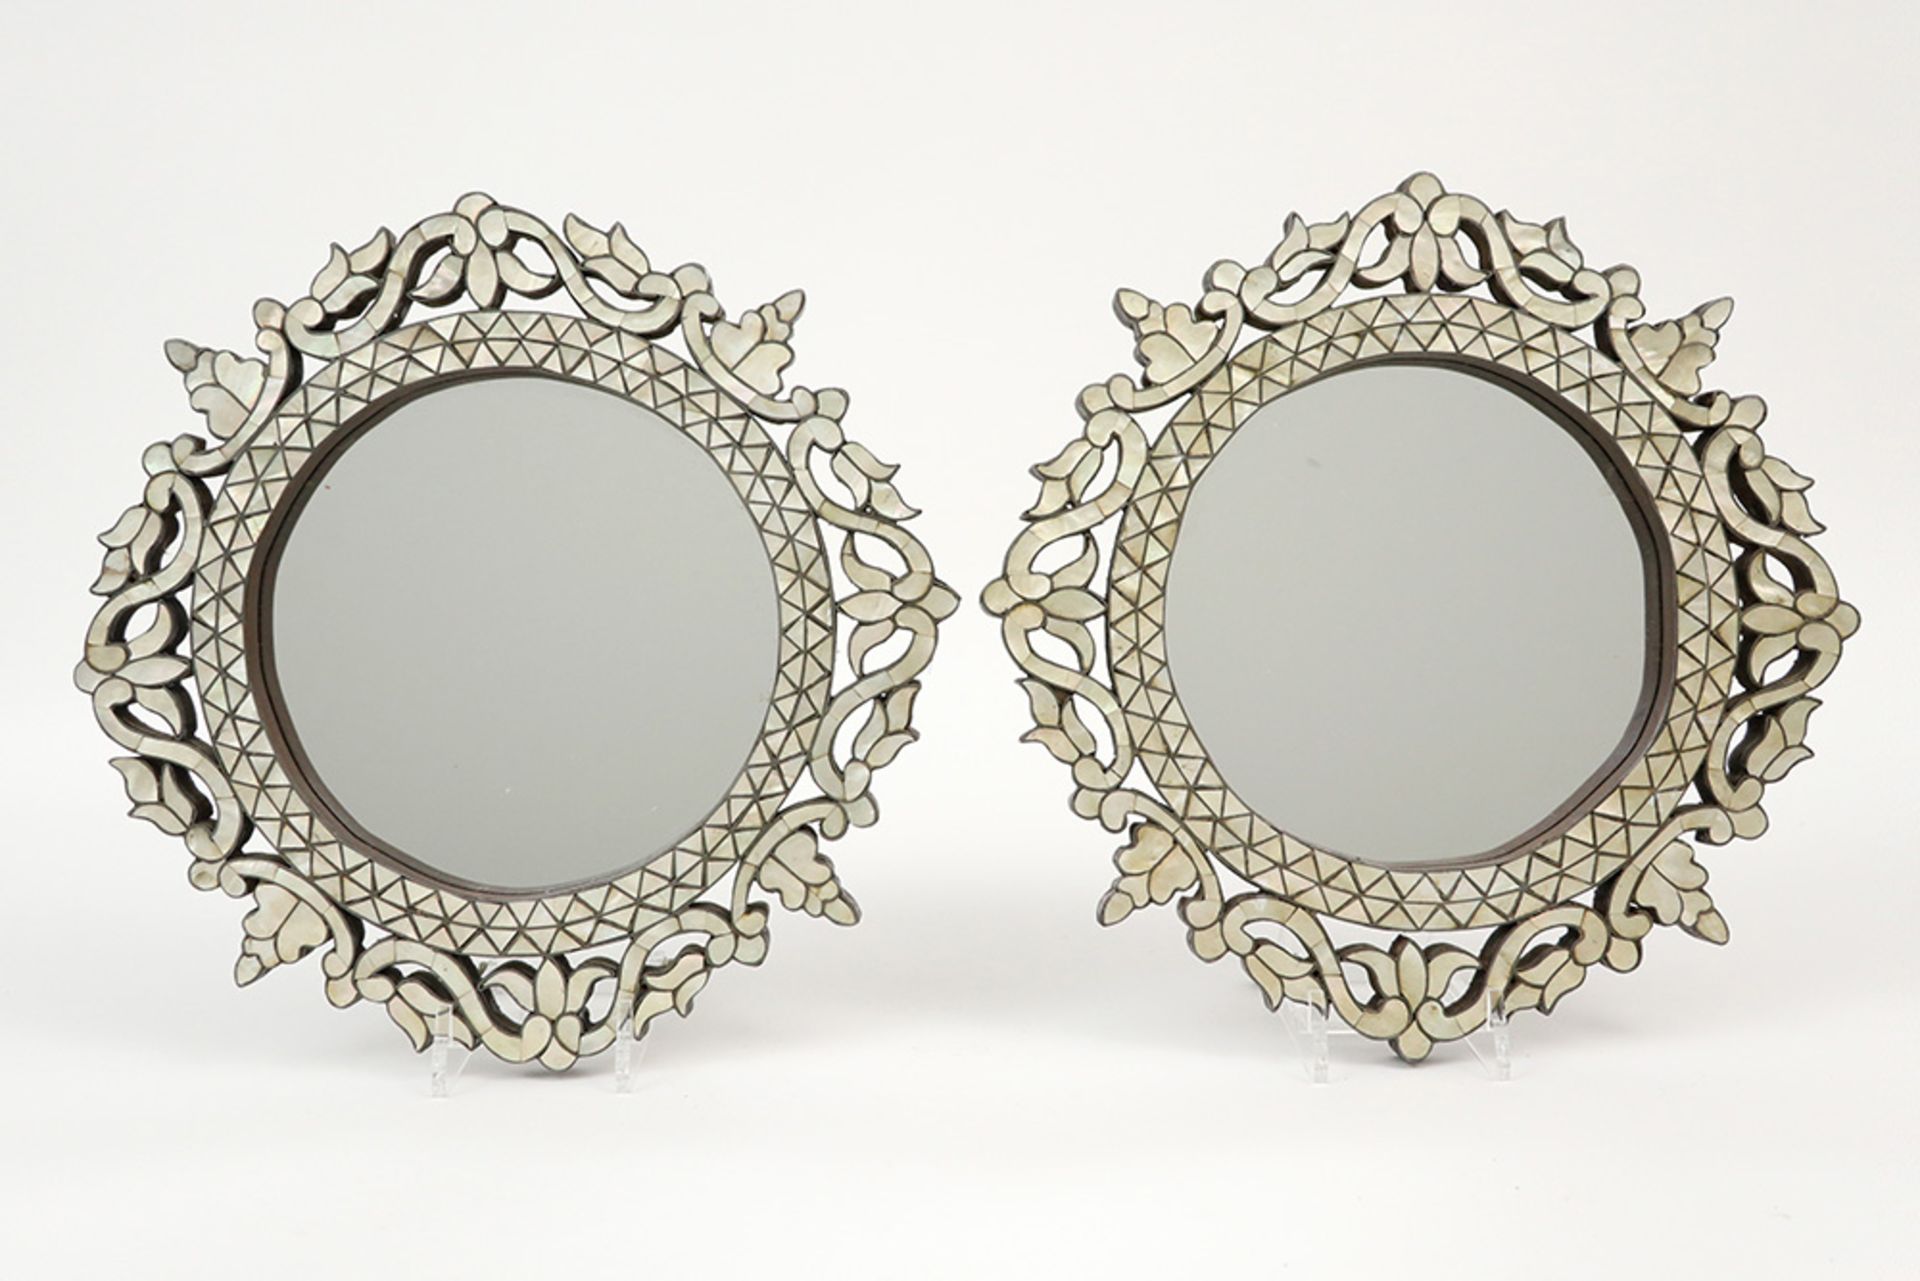 two Ottoman mirrors made in Syria with mother of pearl inlay || Twee Ottomaanse spiegels met